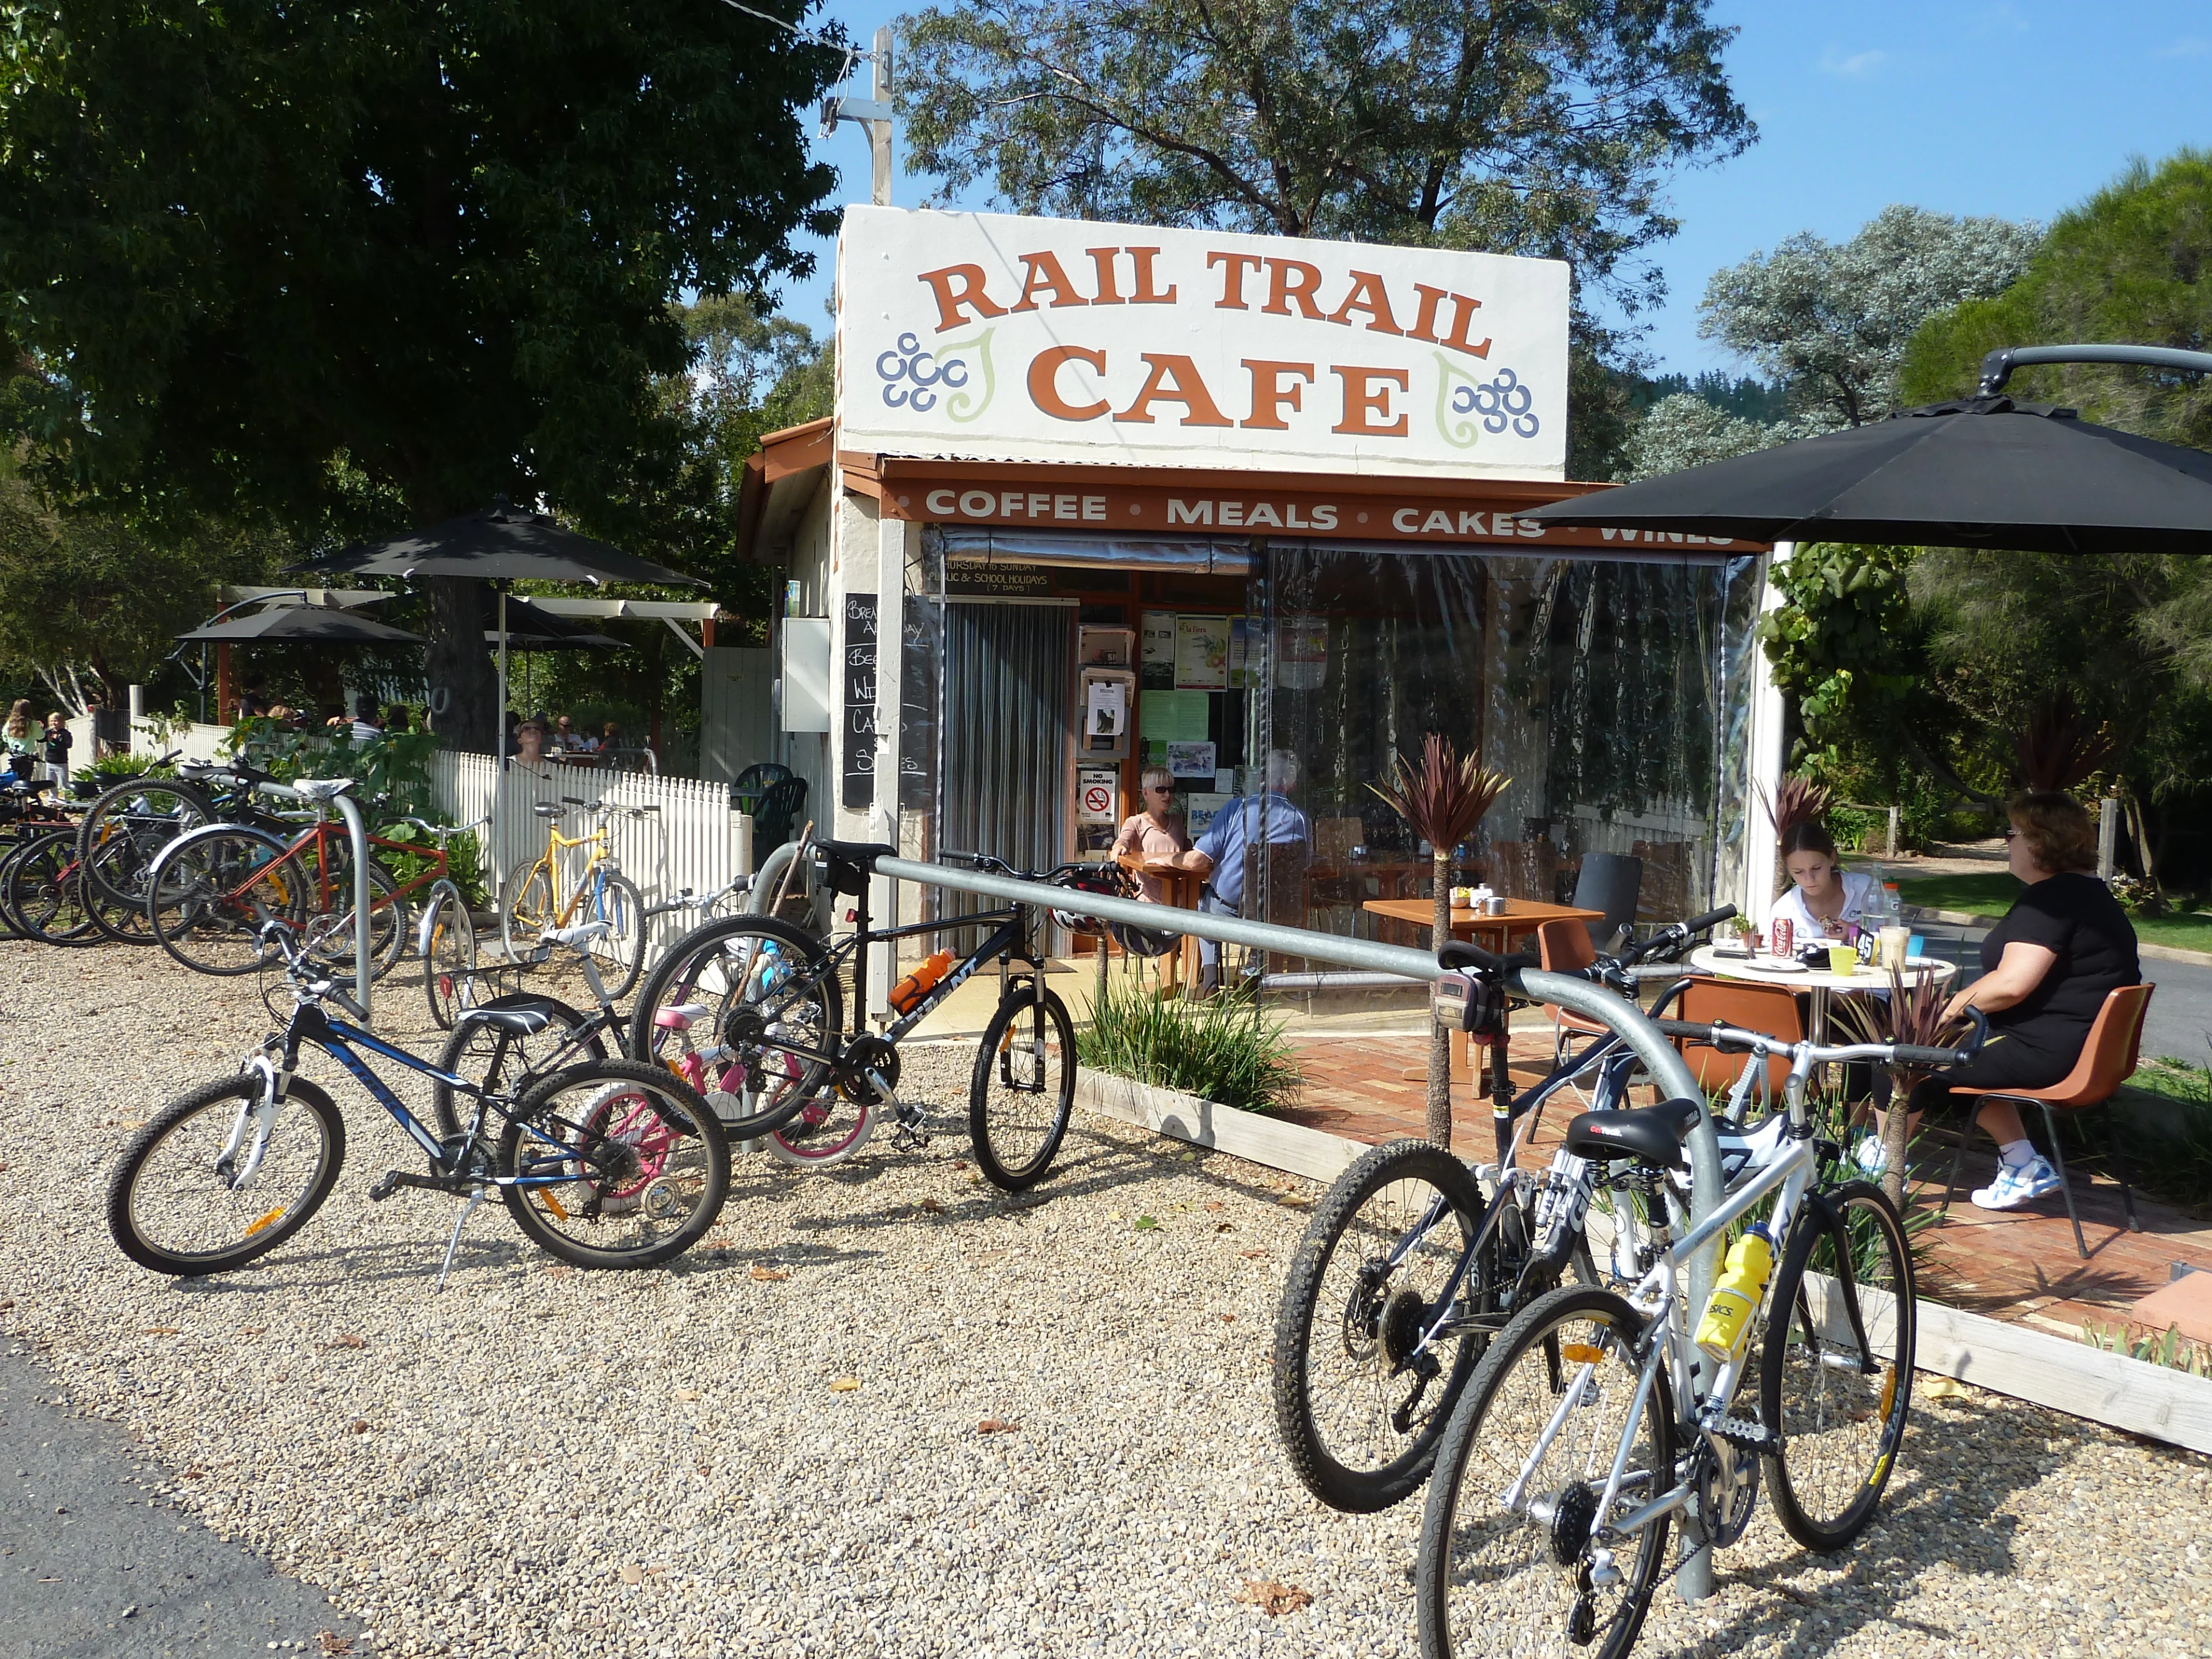 Photo of bicycles in front of the Rail Trail Cafe in Porepunkah, Victoria.